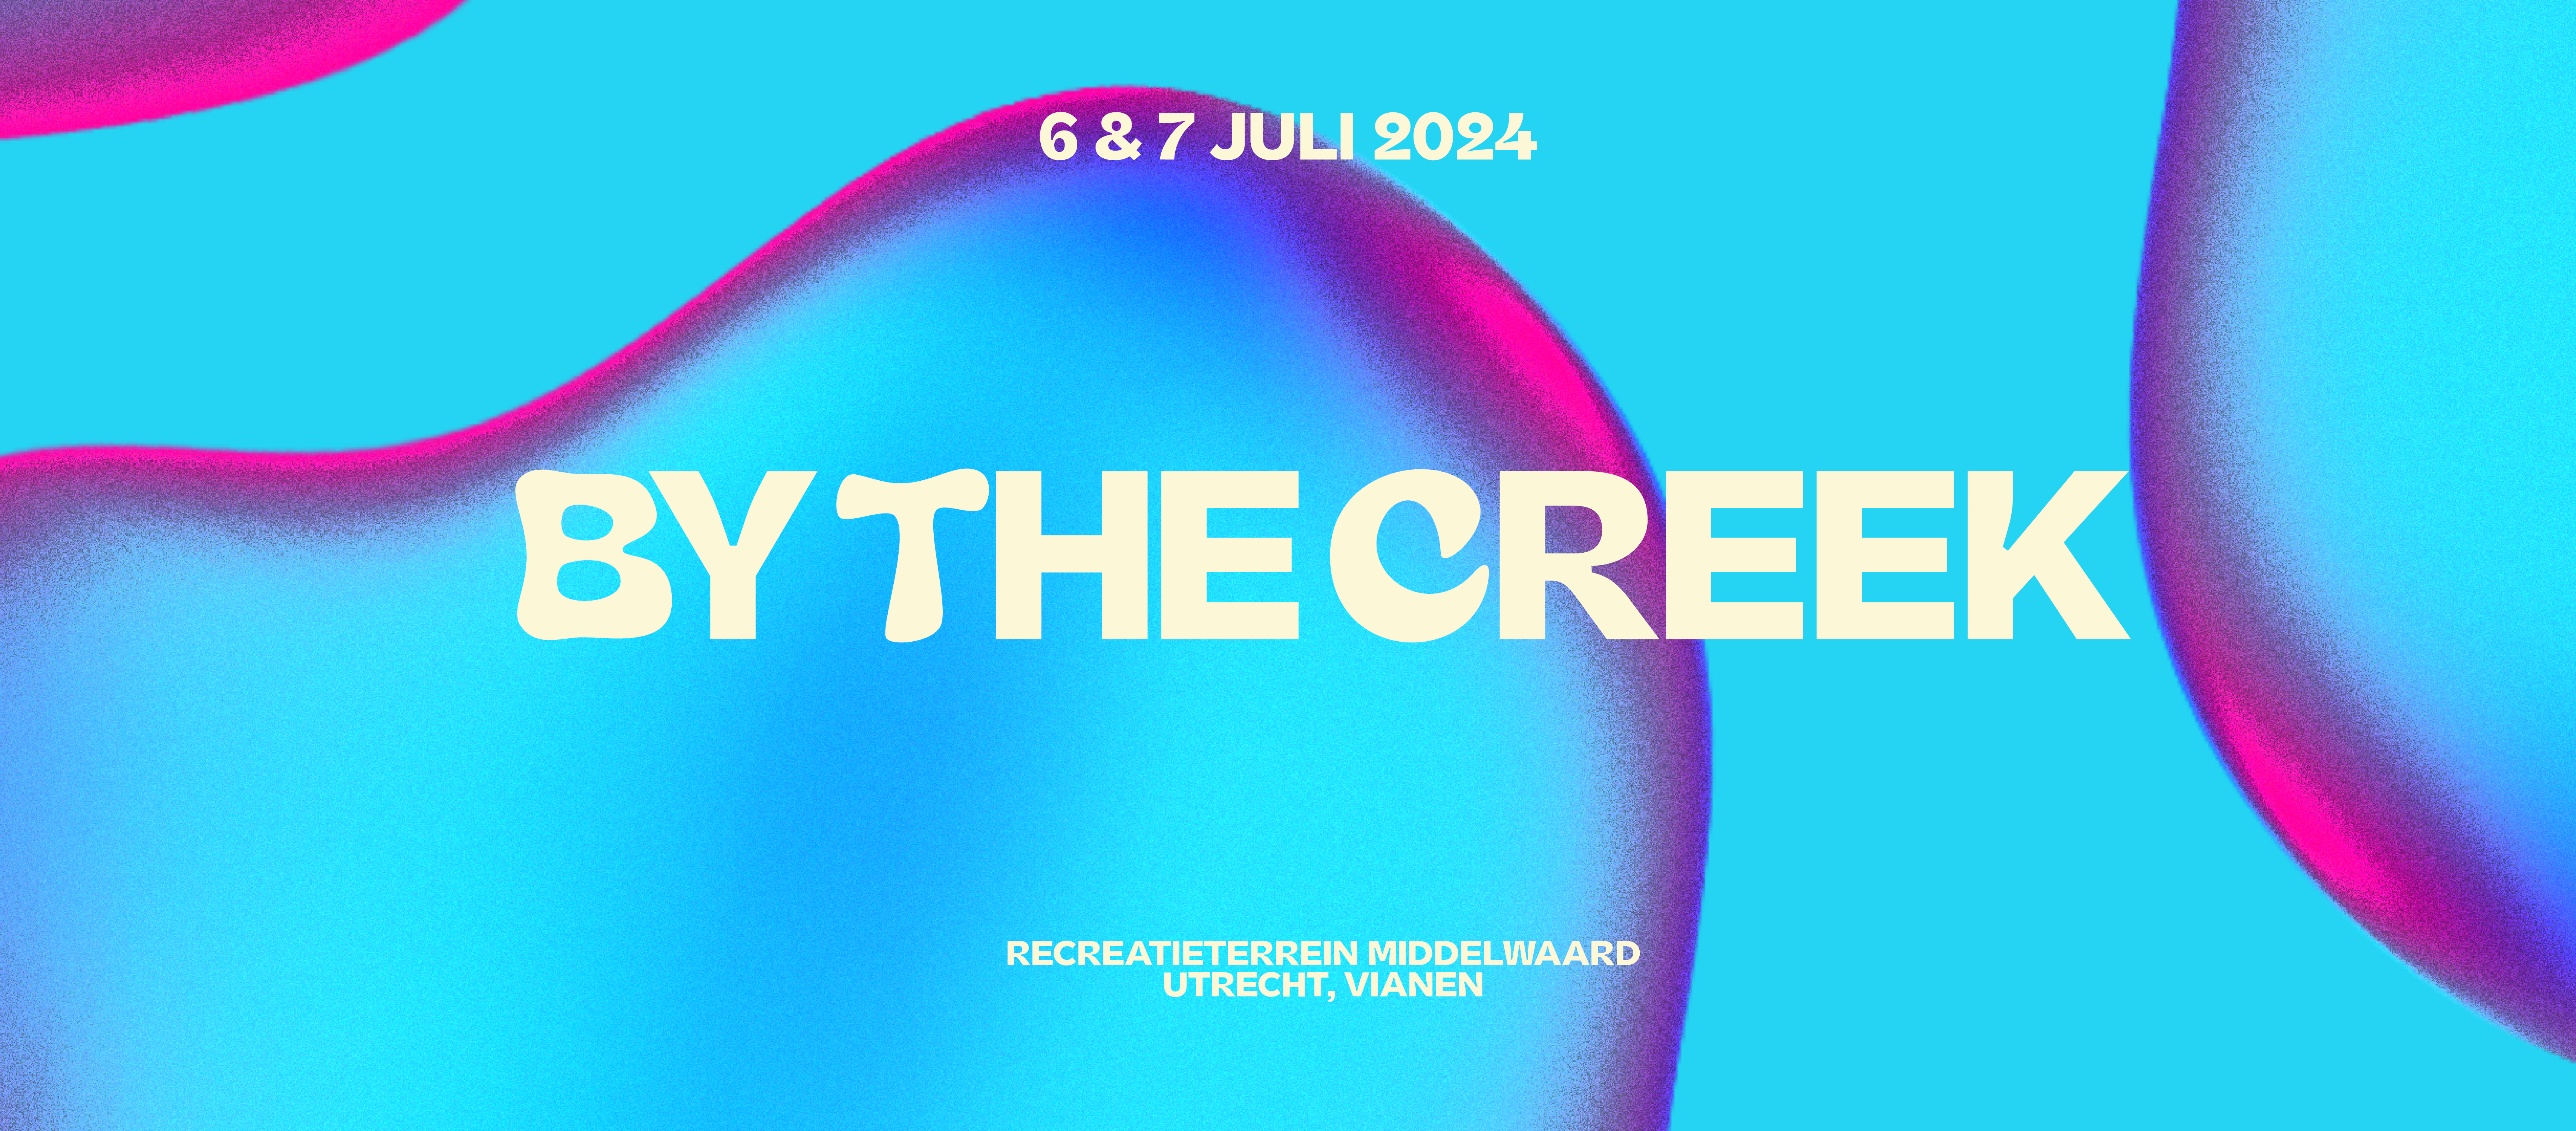 By the Creek 2024 - フライヤー表